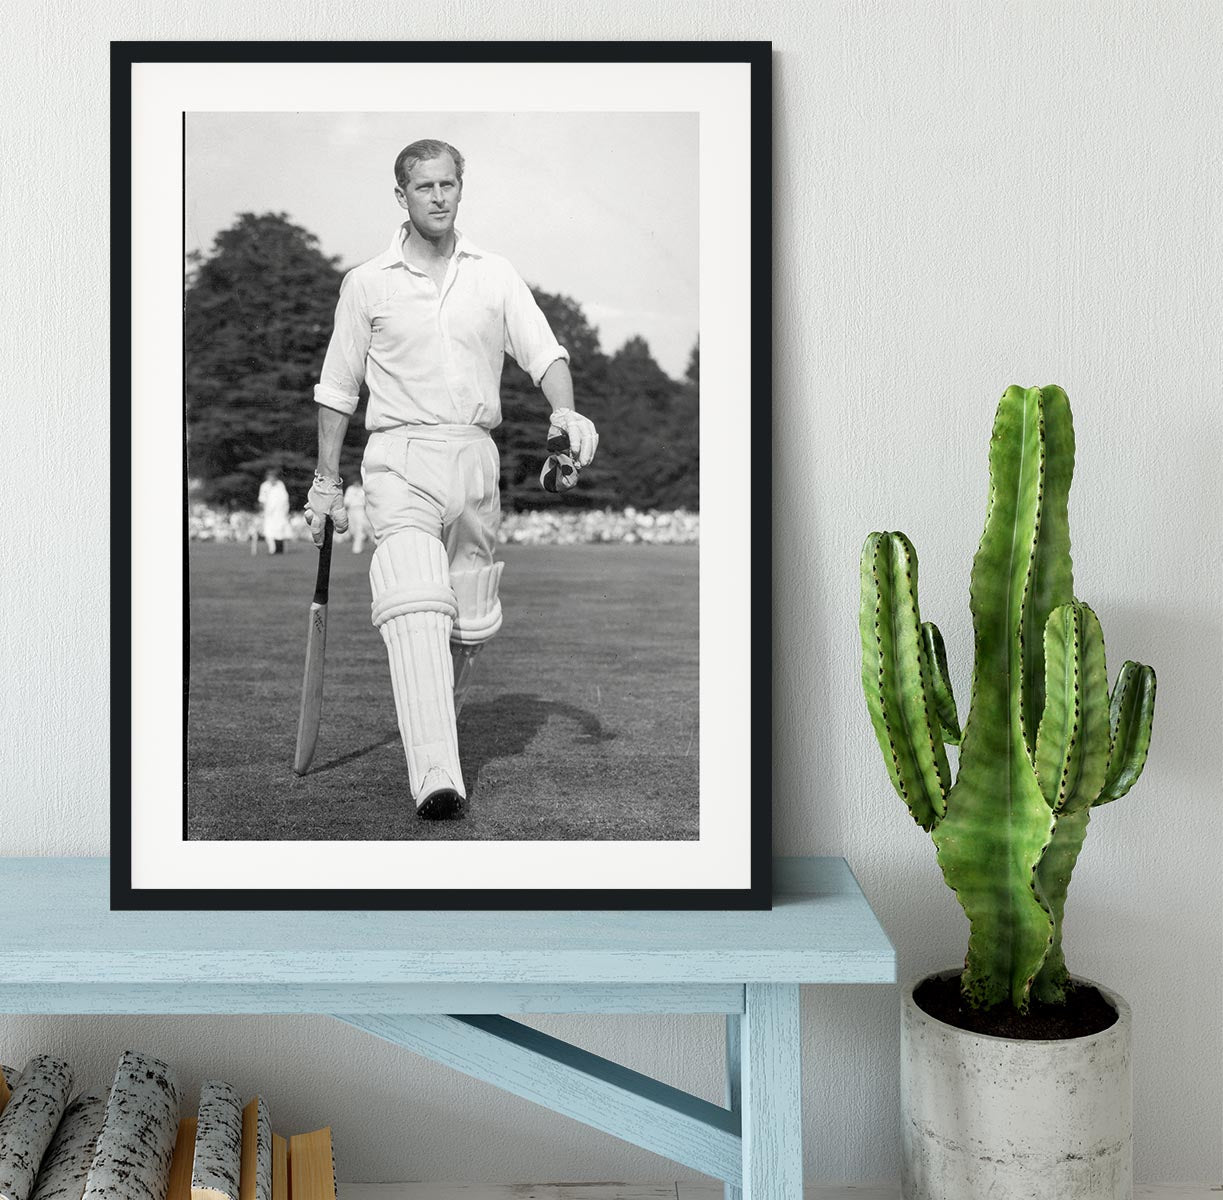 Prince Philip as cricket captain in a charity match Framed Print - Canvas Art Rocks - 1